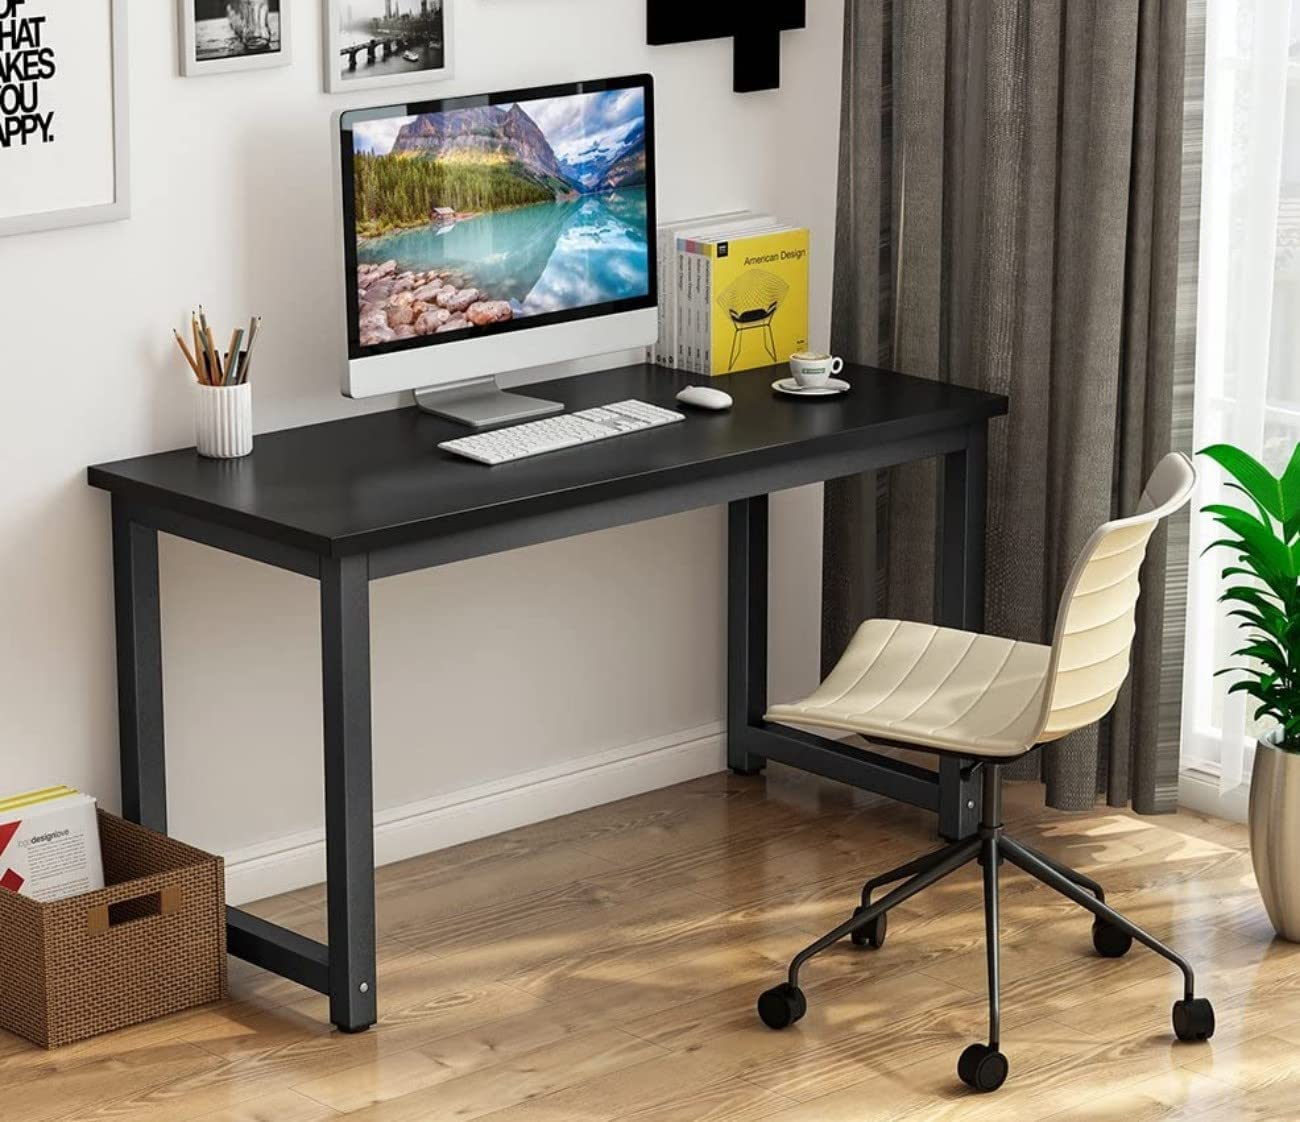 SKY-TOUCH Computer Desk, Computer Laptop Table Desk Office Desk Study Writing Desk Easy Assembly, Computer Desk Modern Simple Style for Home Office 120 x 60CM Black